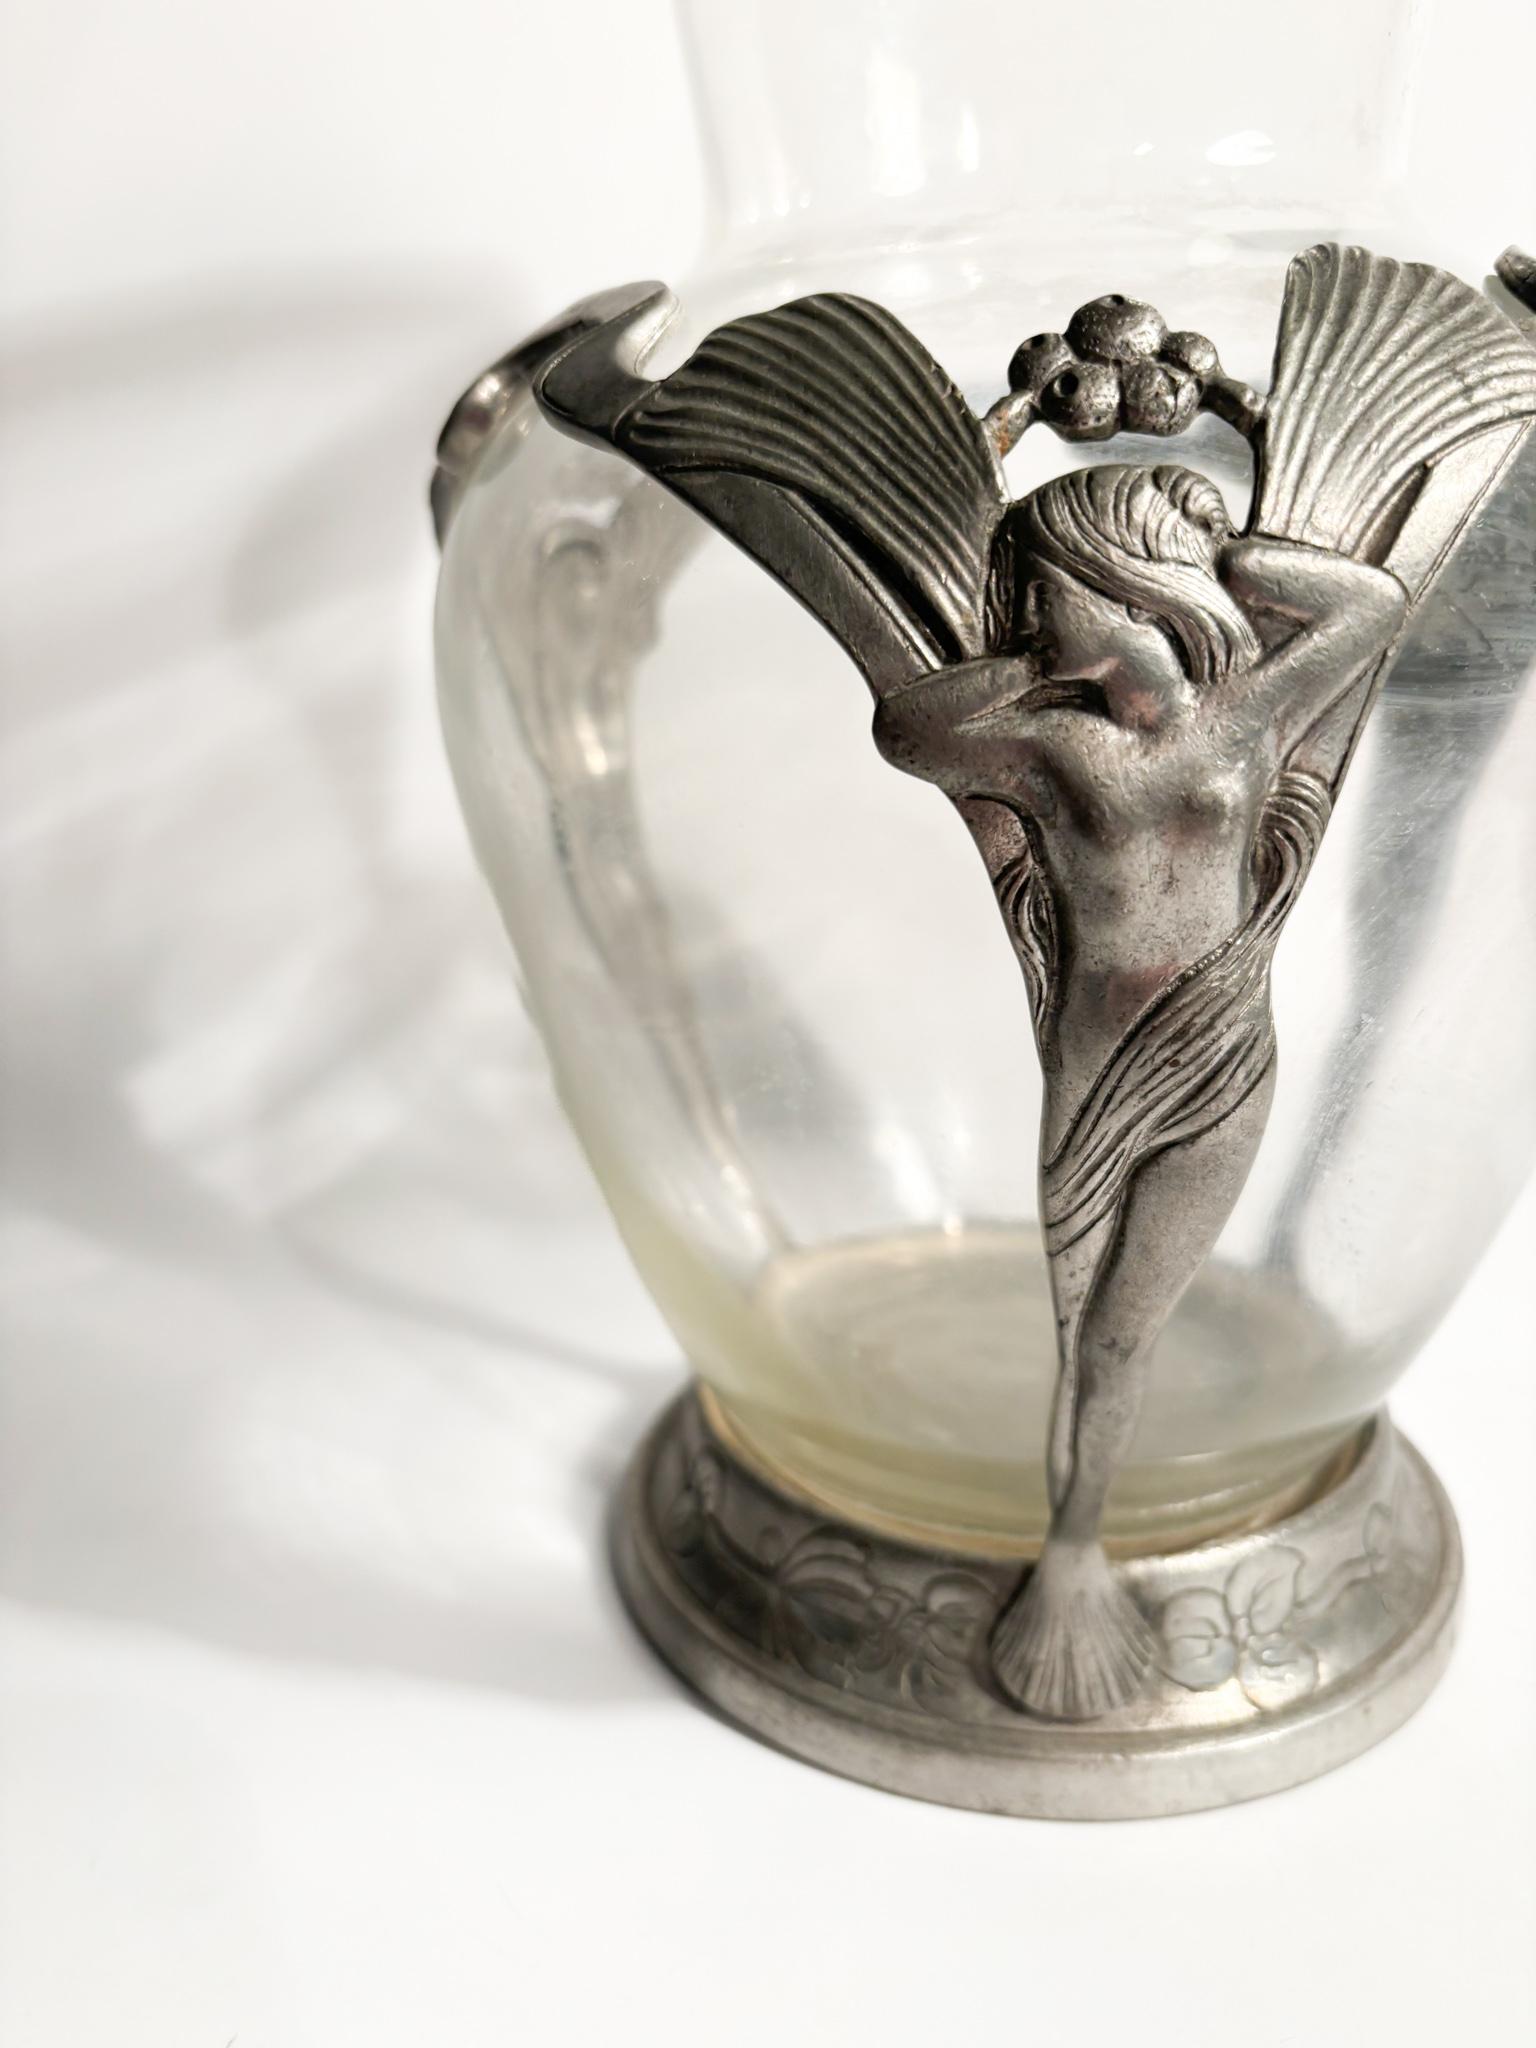 Liberty vase in transparent glass and pewter carved with ladies, made in the early 20th century

Ø cm 16 h cm 28

Art Nouveau is an international style of art, architecture, and applied art, especially the decorative arts, popular between 1890 and